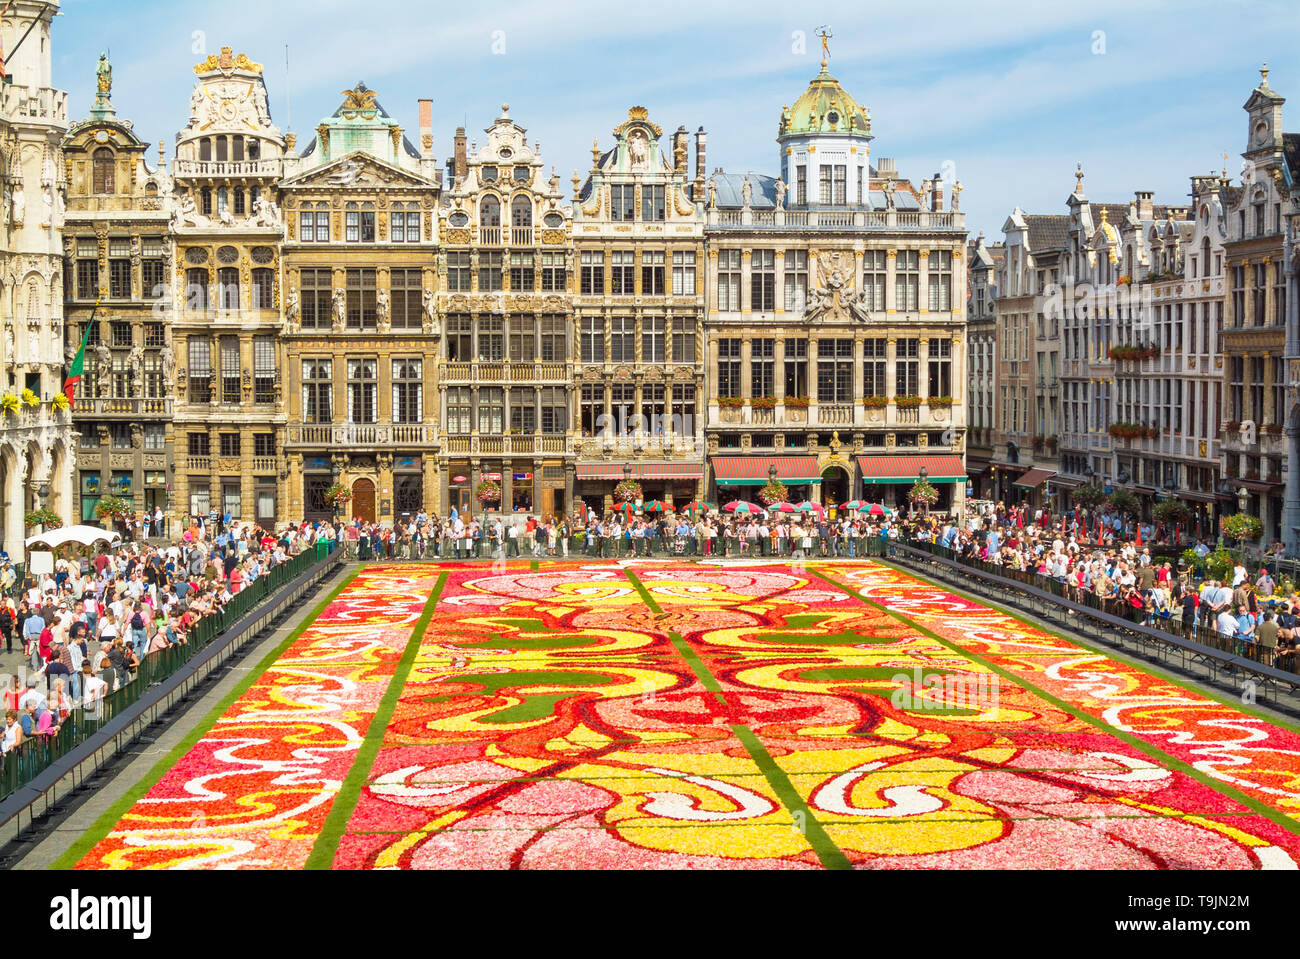 Grand' place Brussels showing  the flower carpet art deco theme Brussels Belgium EU Europe Stock Photo